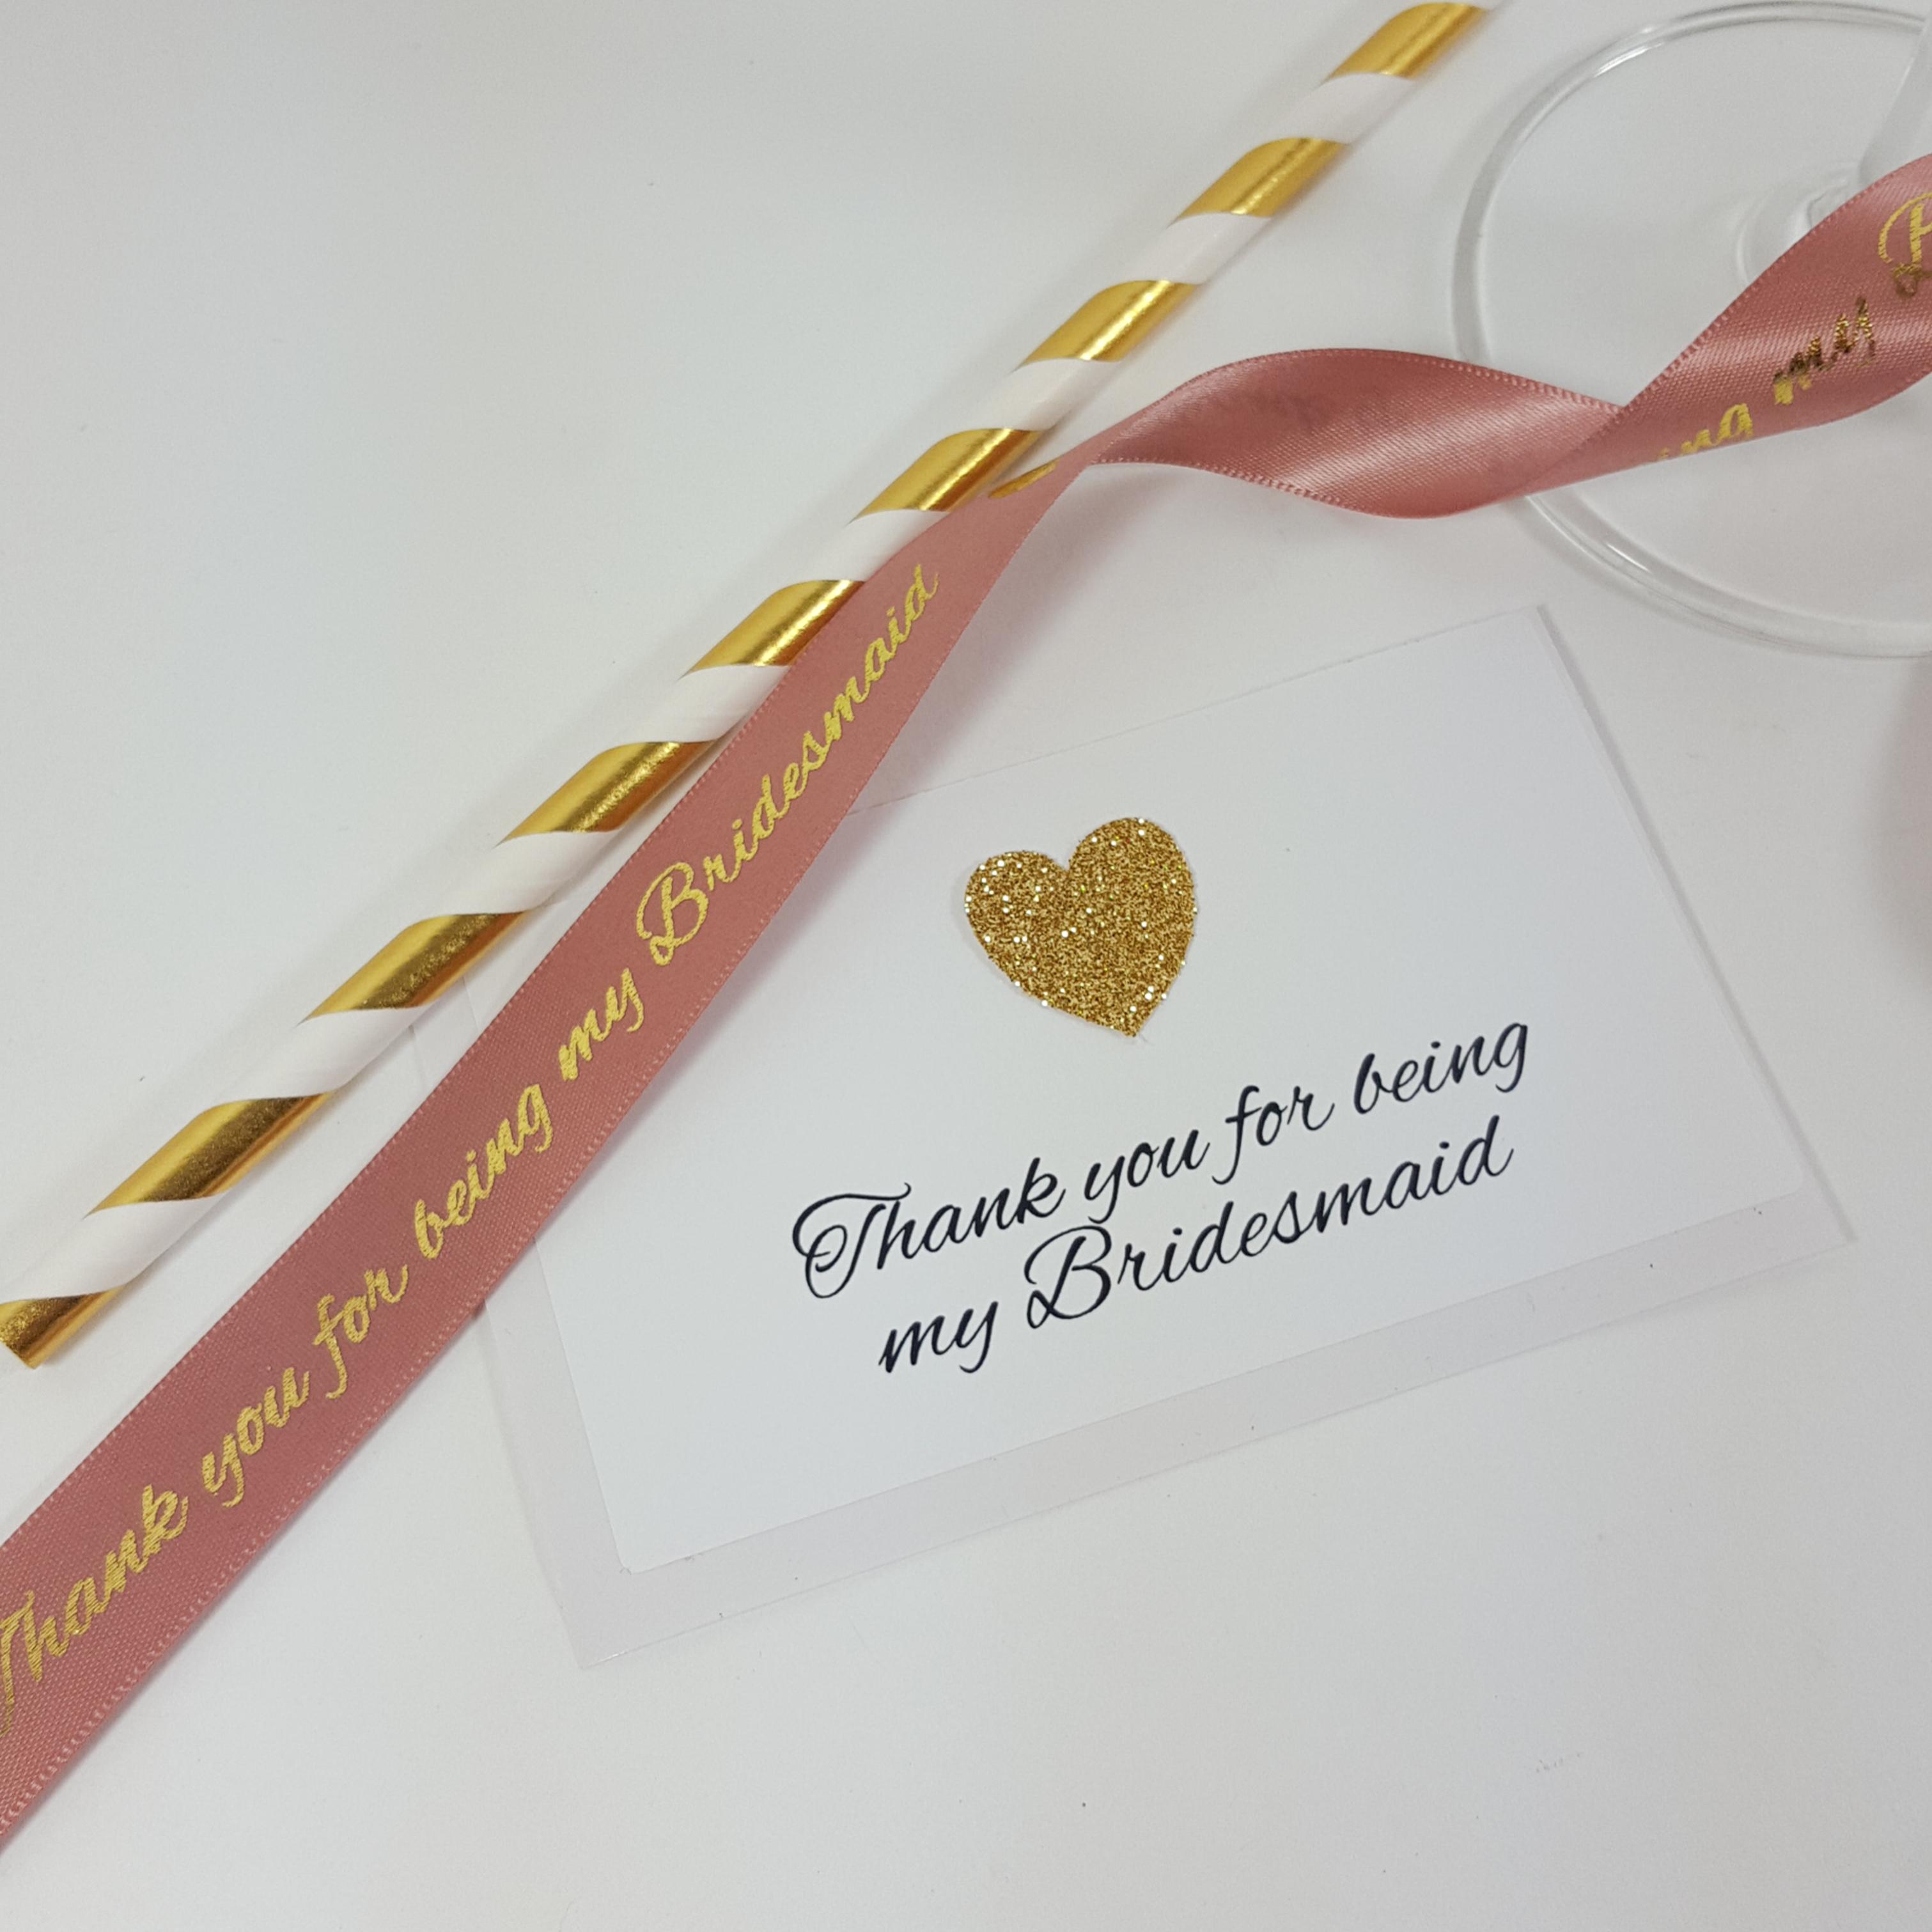 Gold Thank you for being my Bridesmaid Stickers straws and ribbons